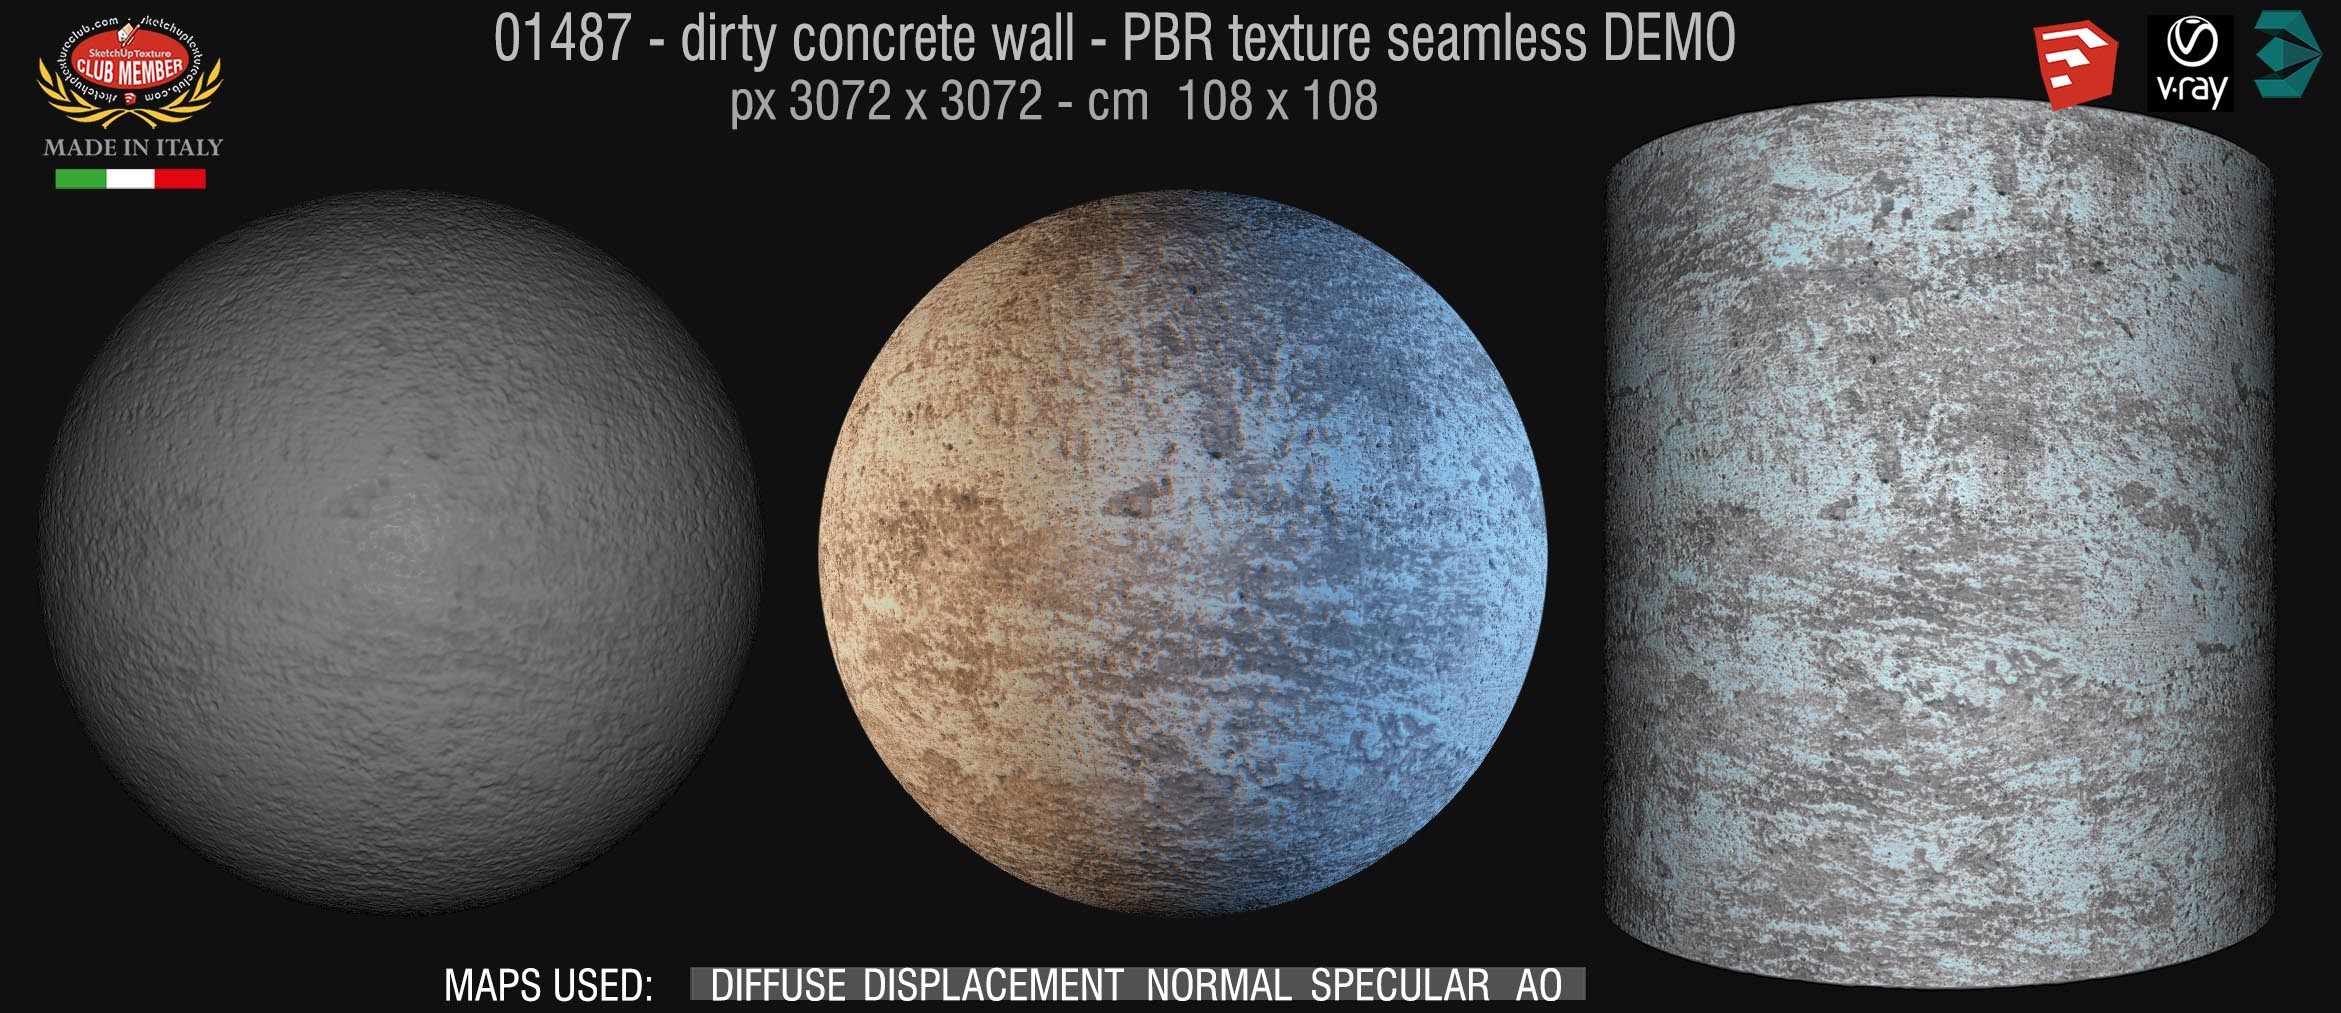 01487 Concrete bare dirty wall PBR texture seamless DEMO